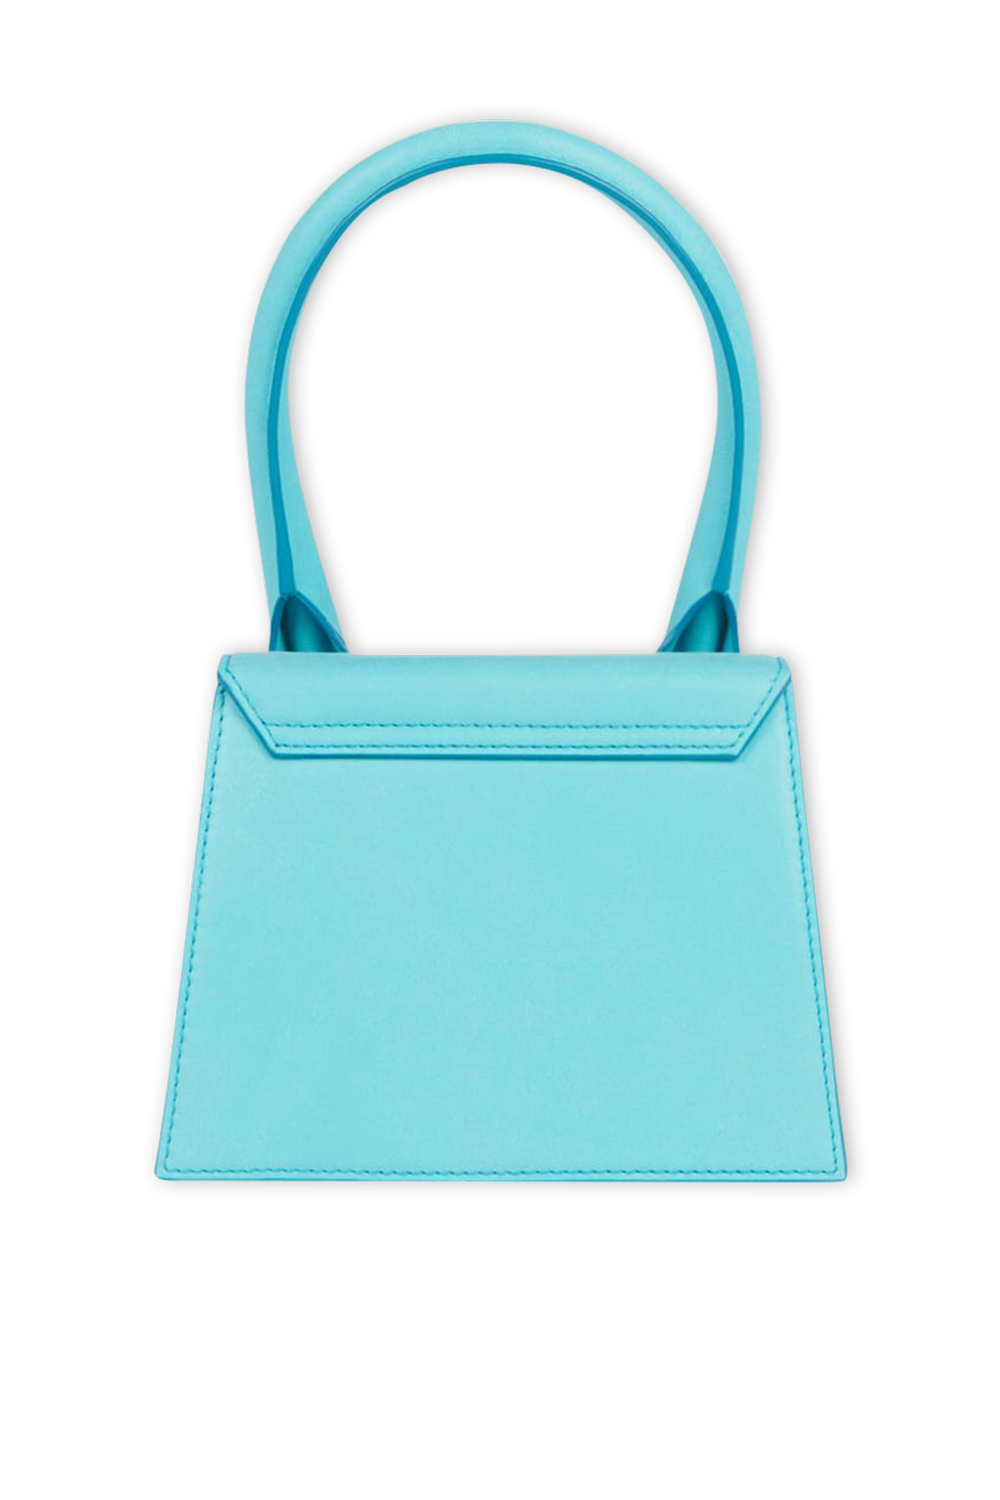 Le Chiquito Moyen in Turquoise JACQUEMUS